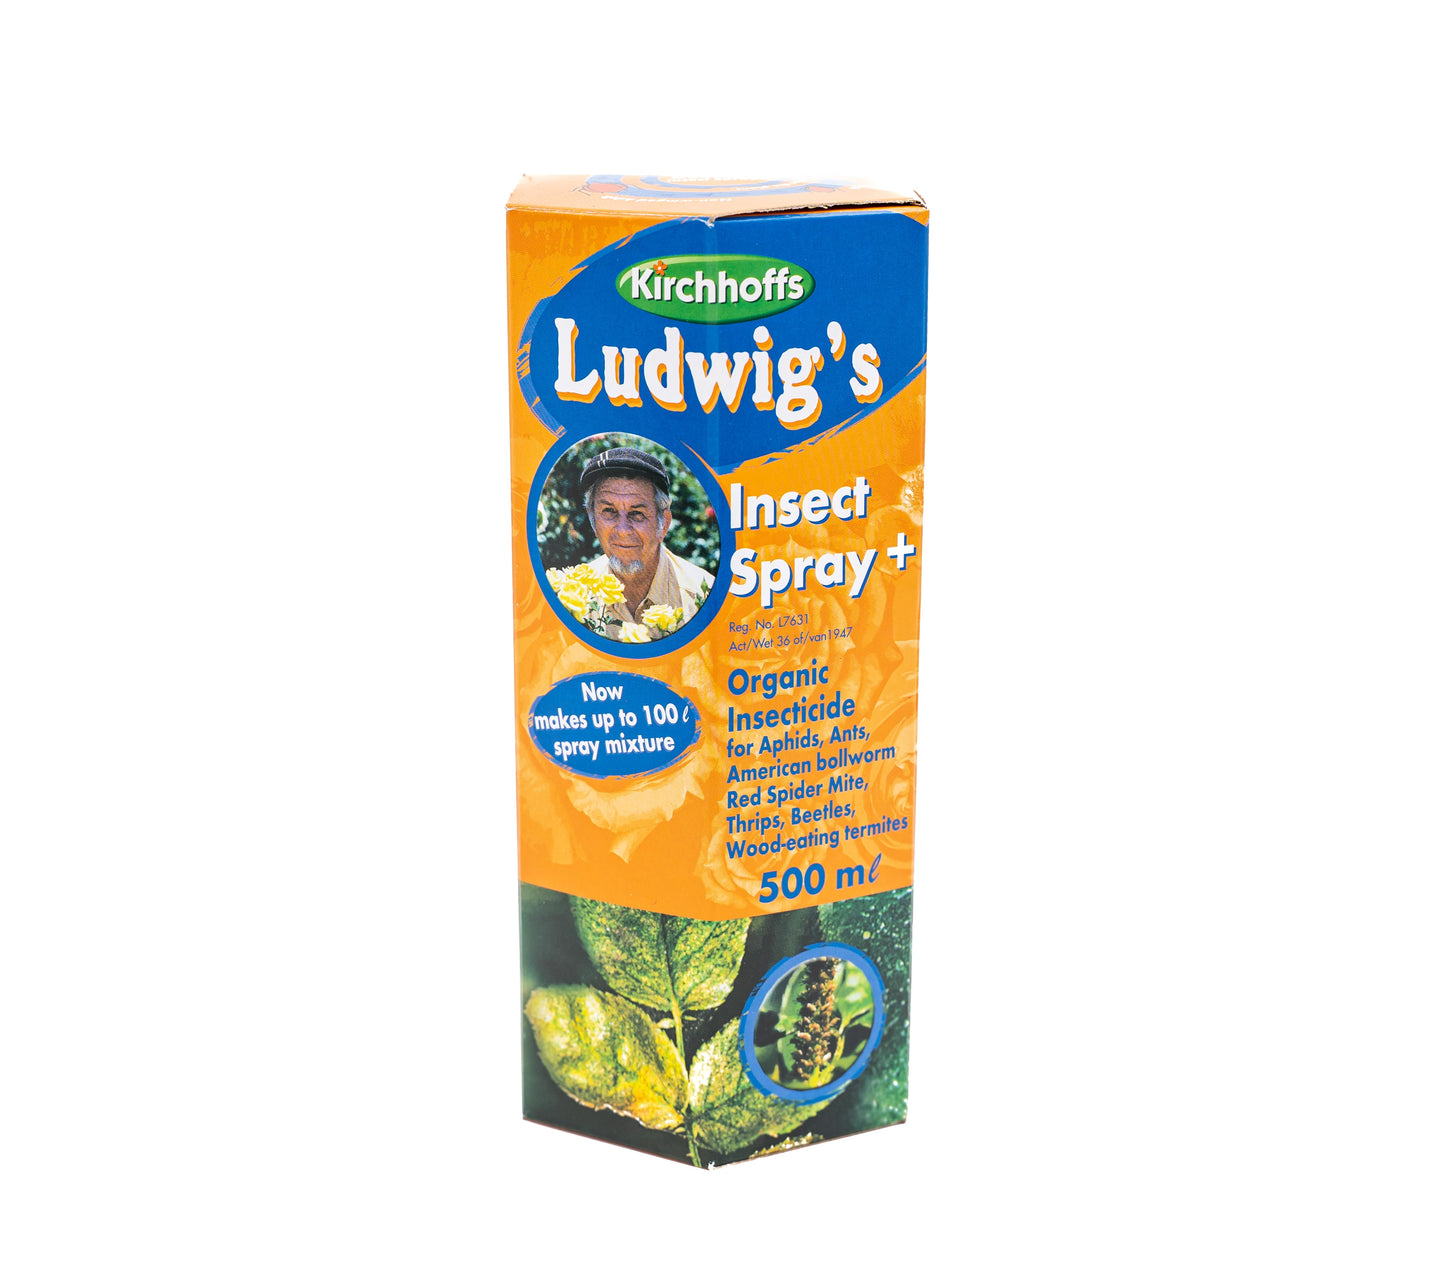 Ludwig's Insect Spray Plus Insecticide